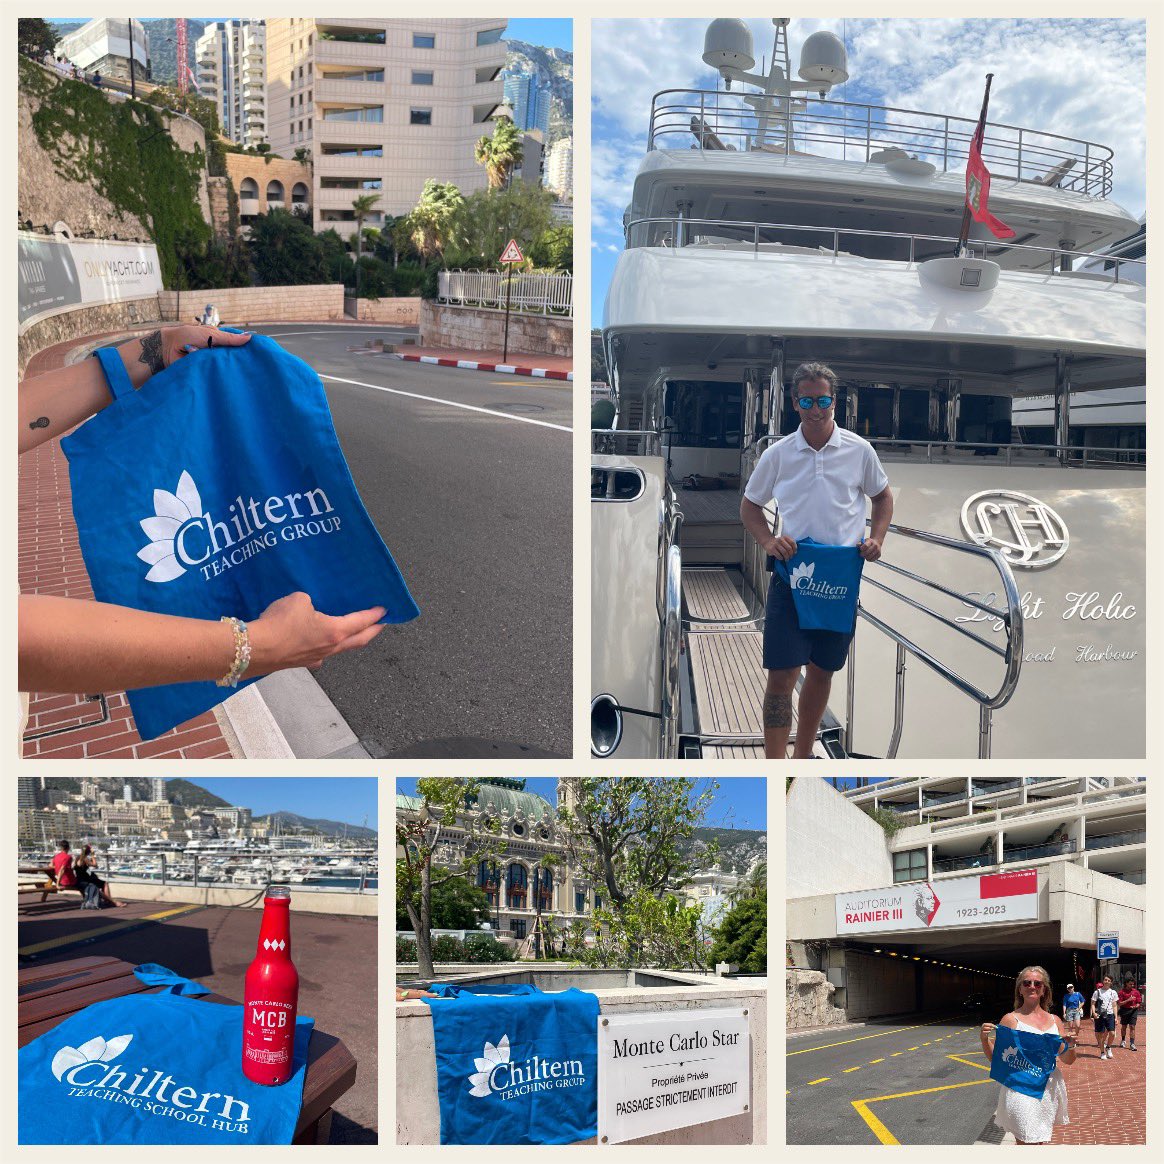 From the F1 track to the luxurious yacht, my work tote bag has been on an incredible journey in Monaco! 🌟💼⛵️🏎 #VIPDay #MonacoAdventures #WorkInStyle #YachtLife #F1Experience

 #chilterntotebagtravels